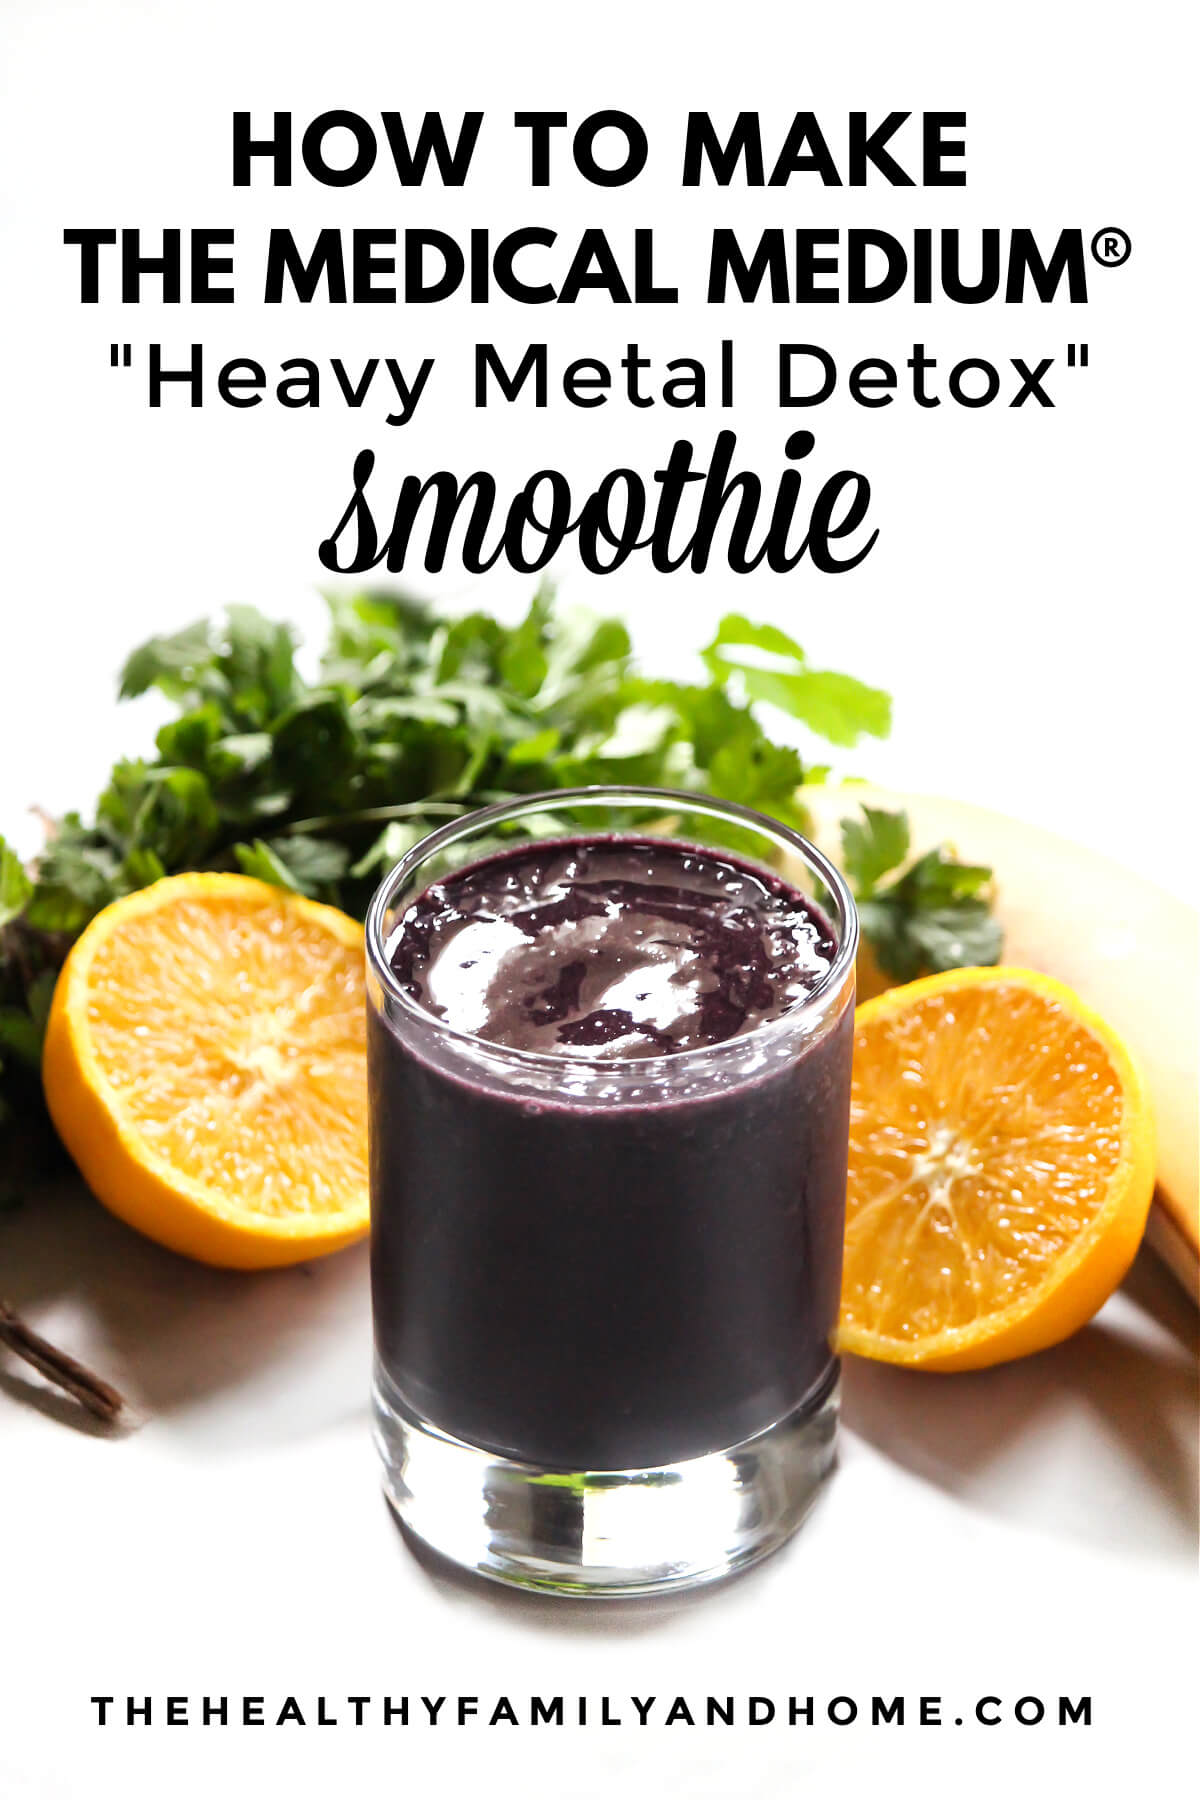 How To Make The Official Medical Medium "Heavy Metal Detox Smoothie"